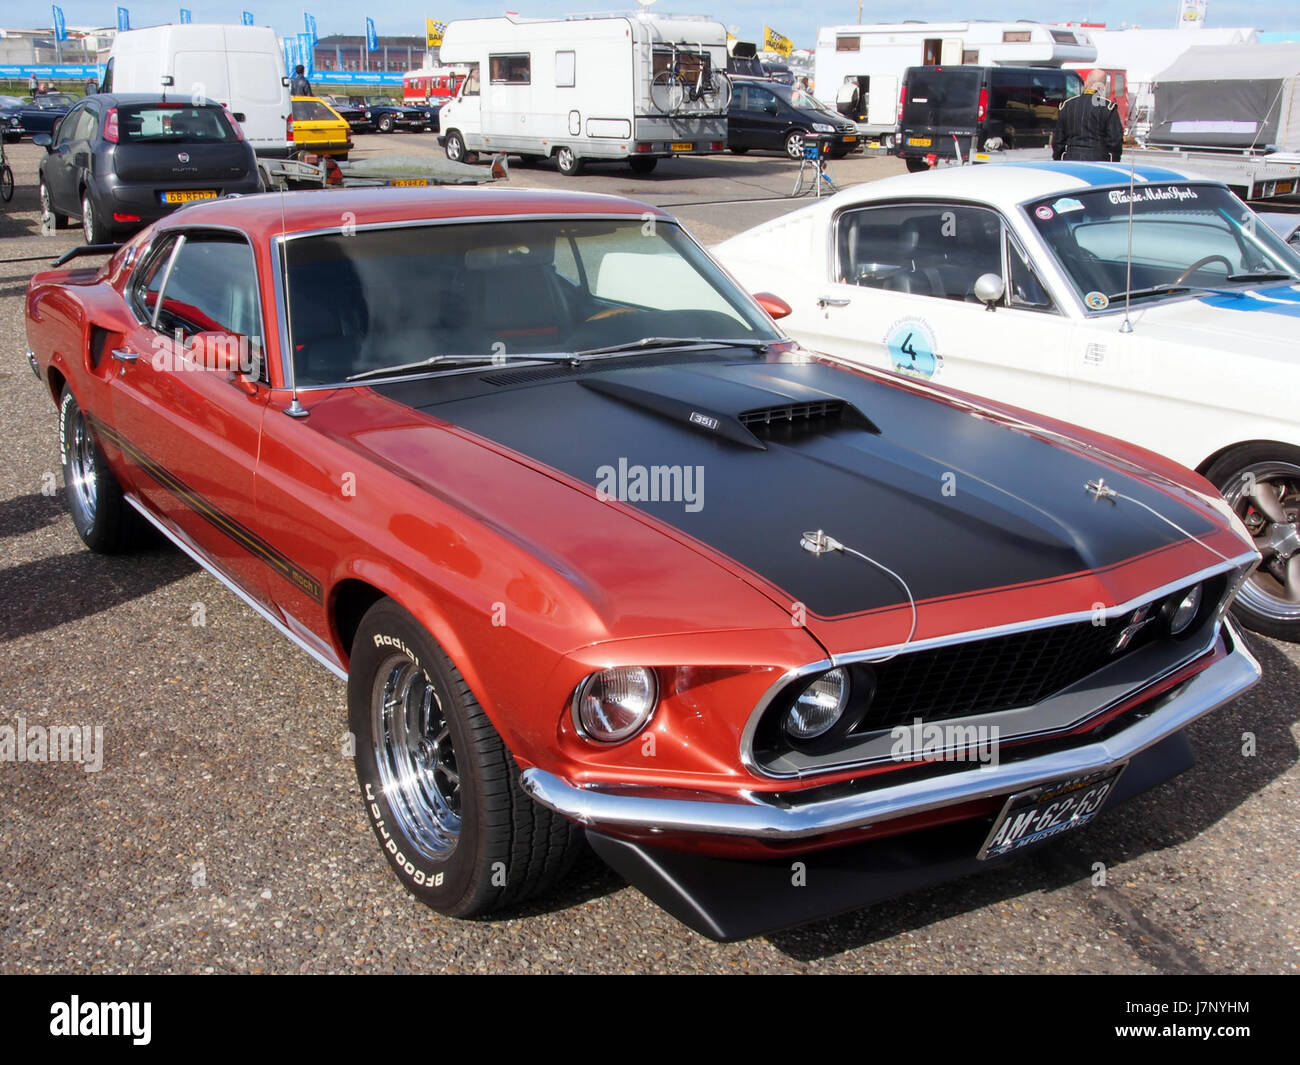 1969 Ford Mustang Mach 1 pic2 Stock Photo - Alamy